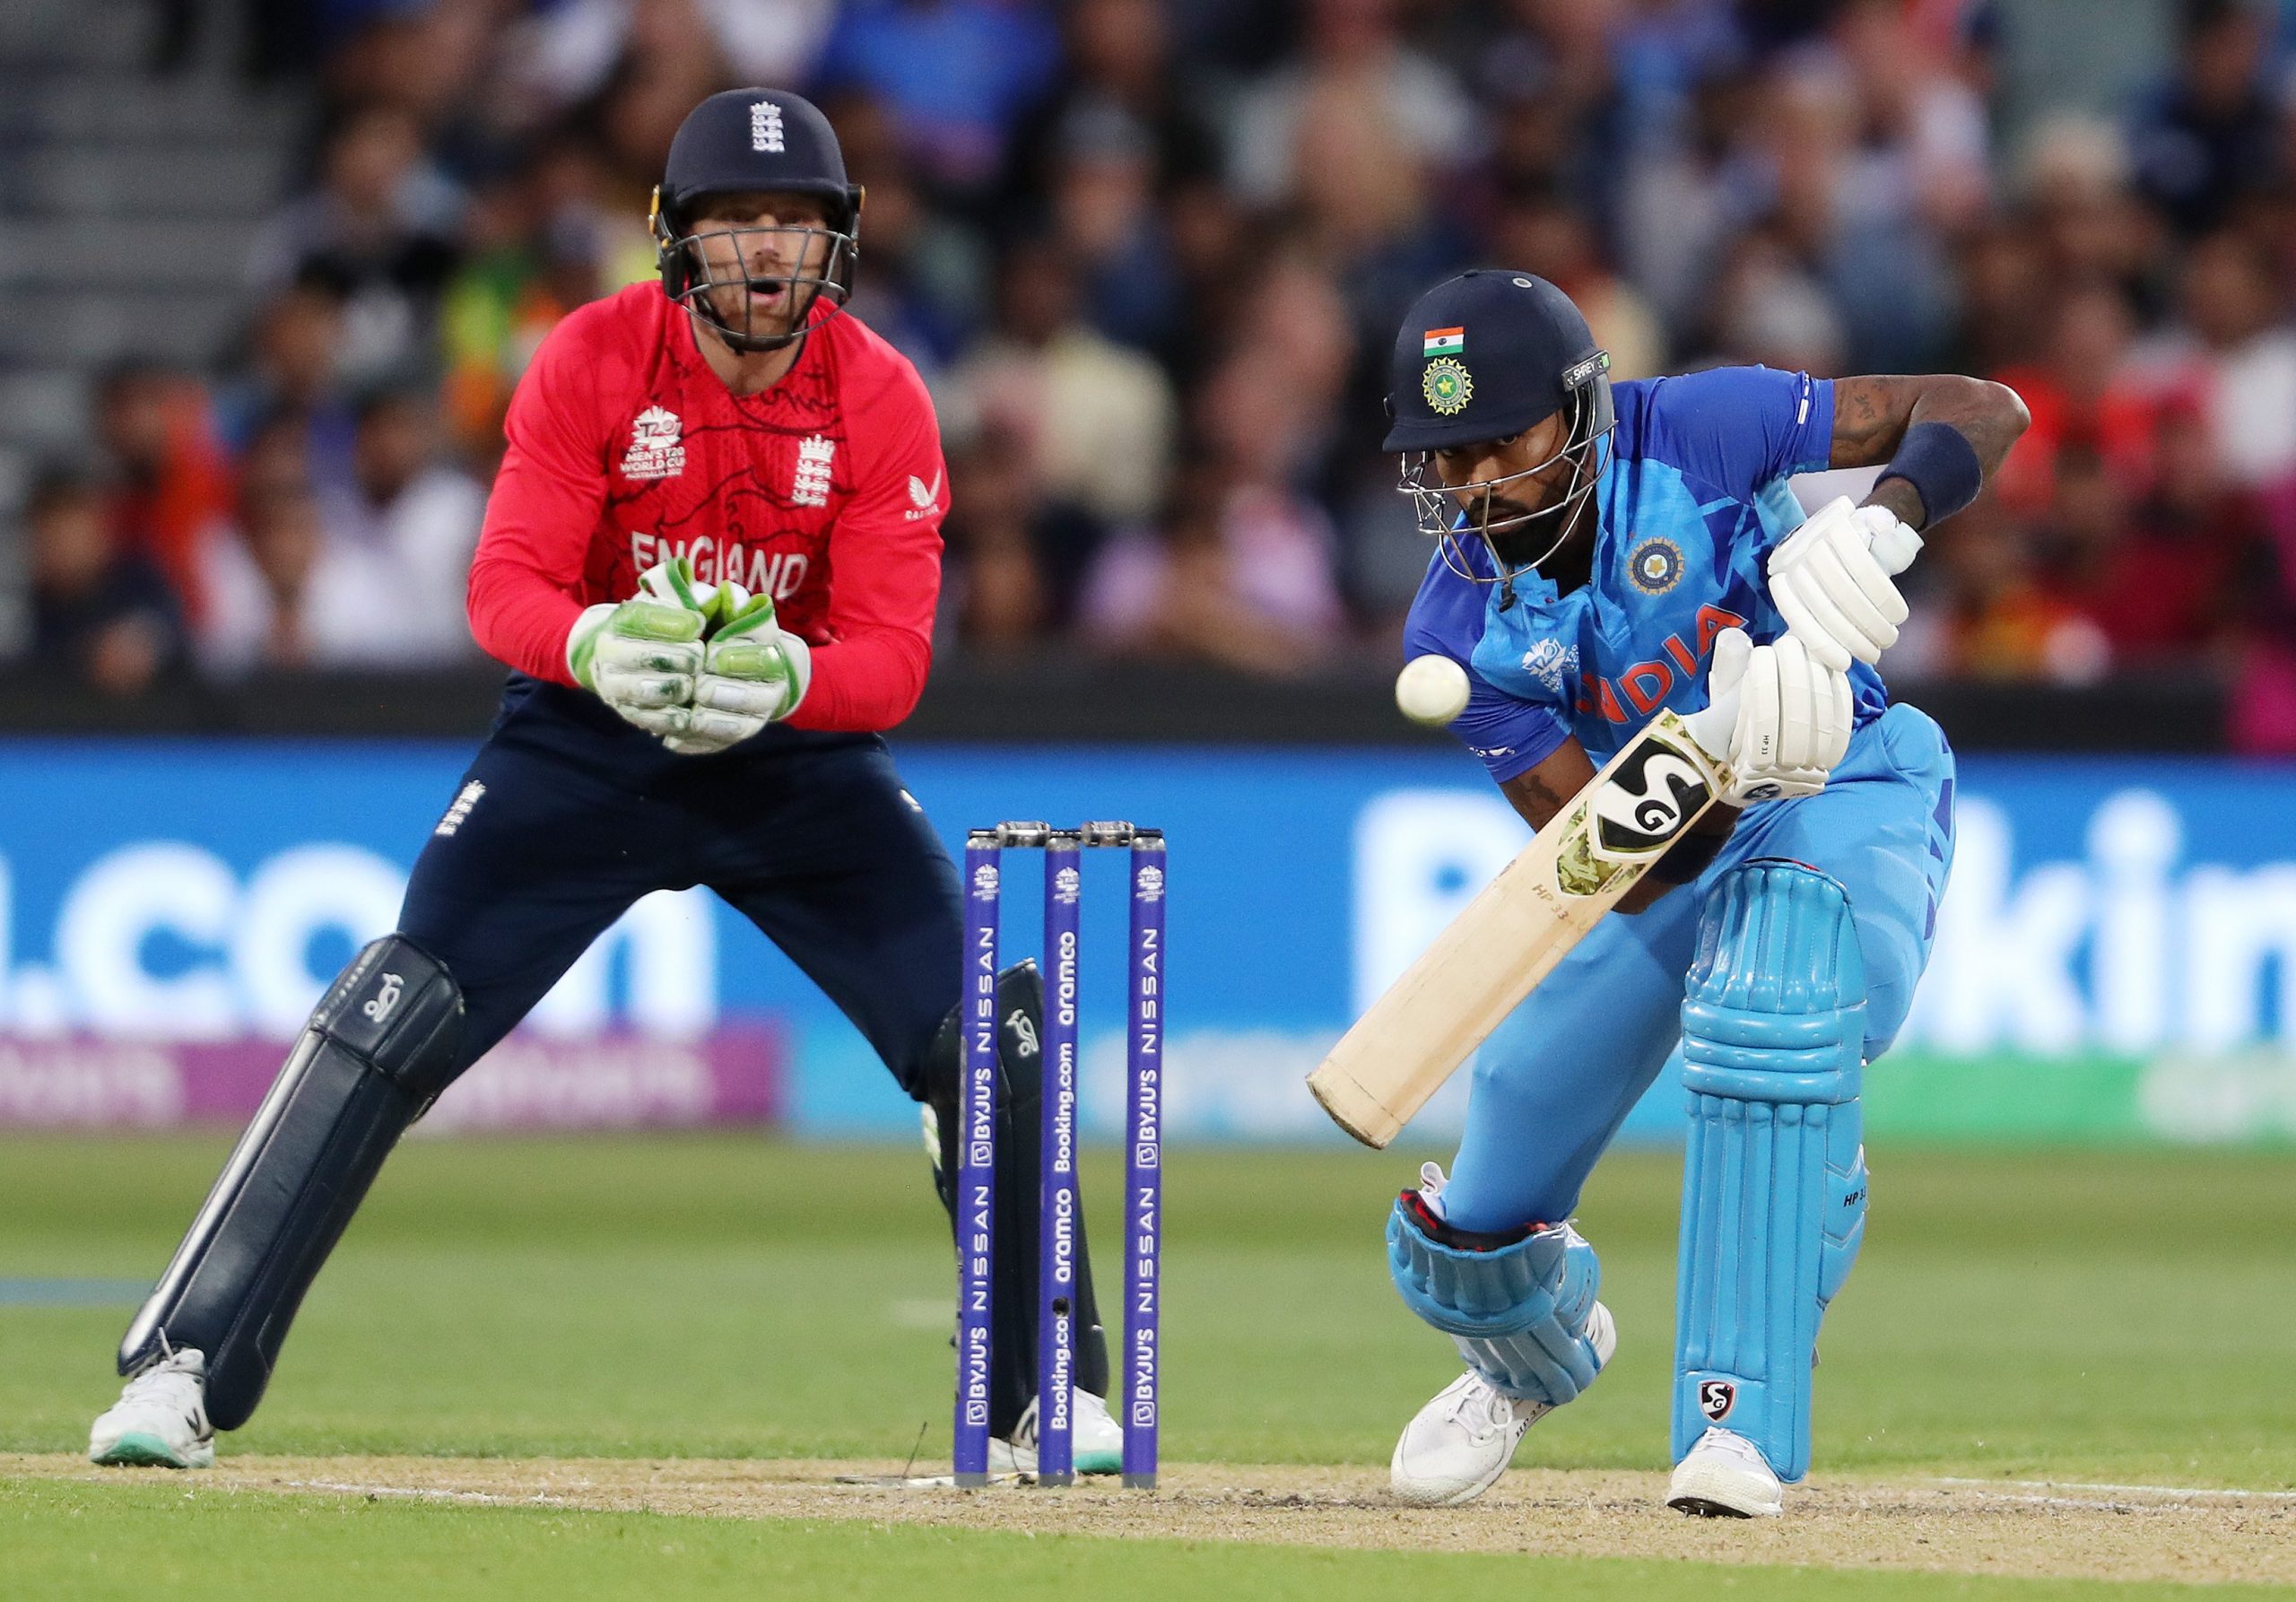 Hardik Pandya of India during the ICC Men's T20 World Cup Semi Final match between India and England